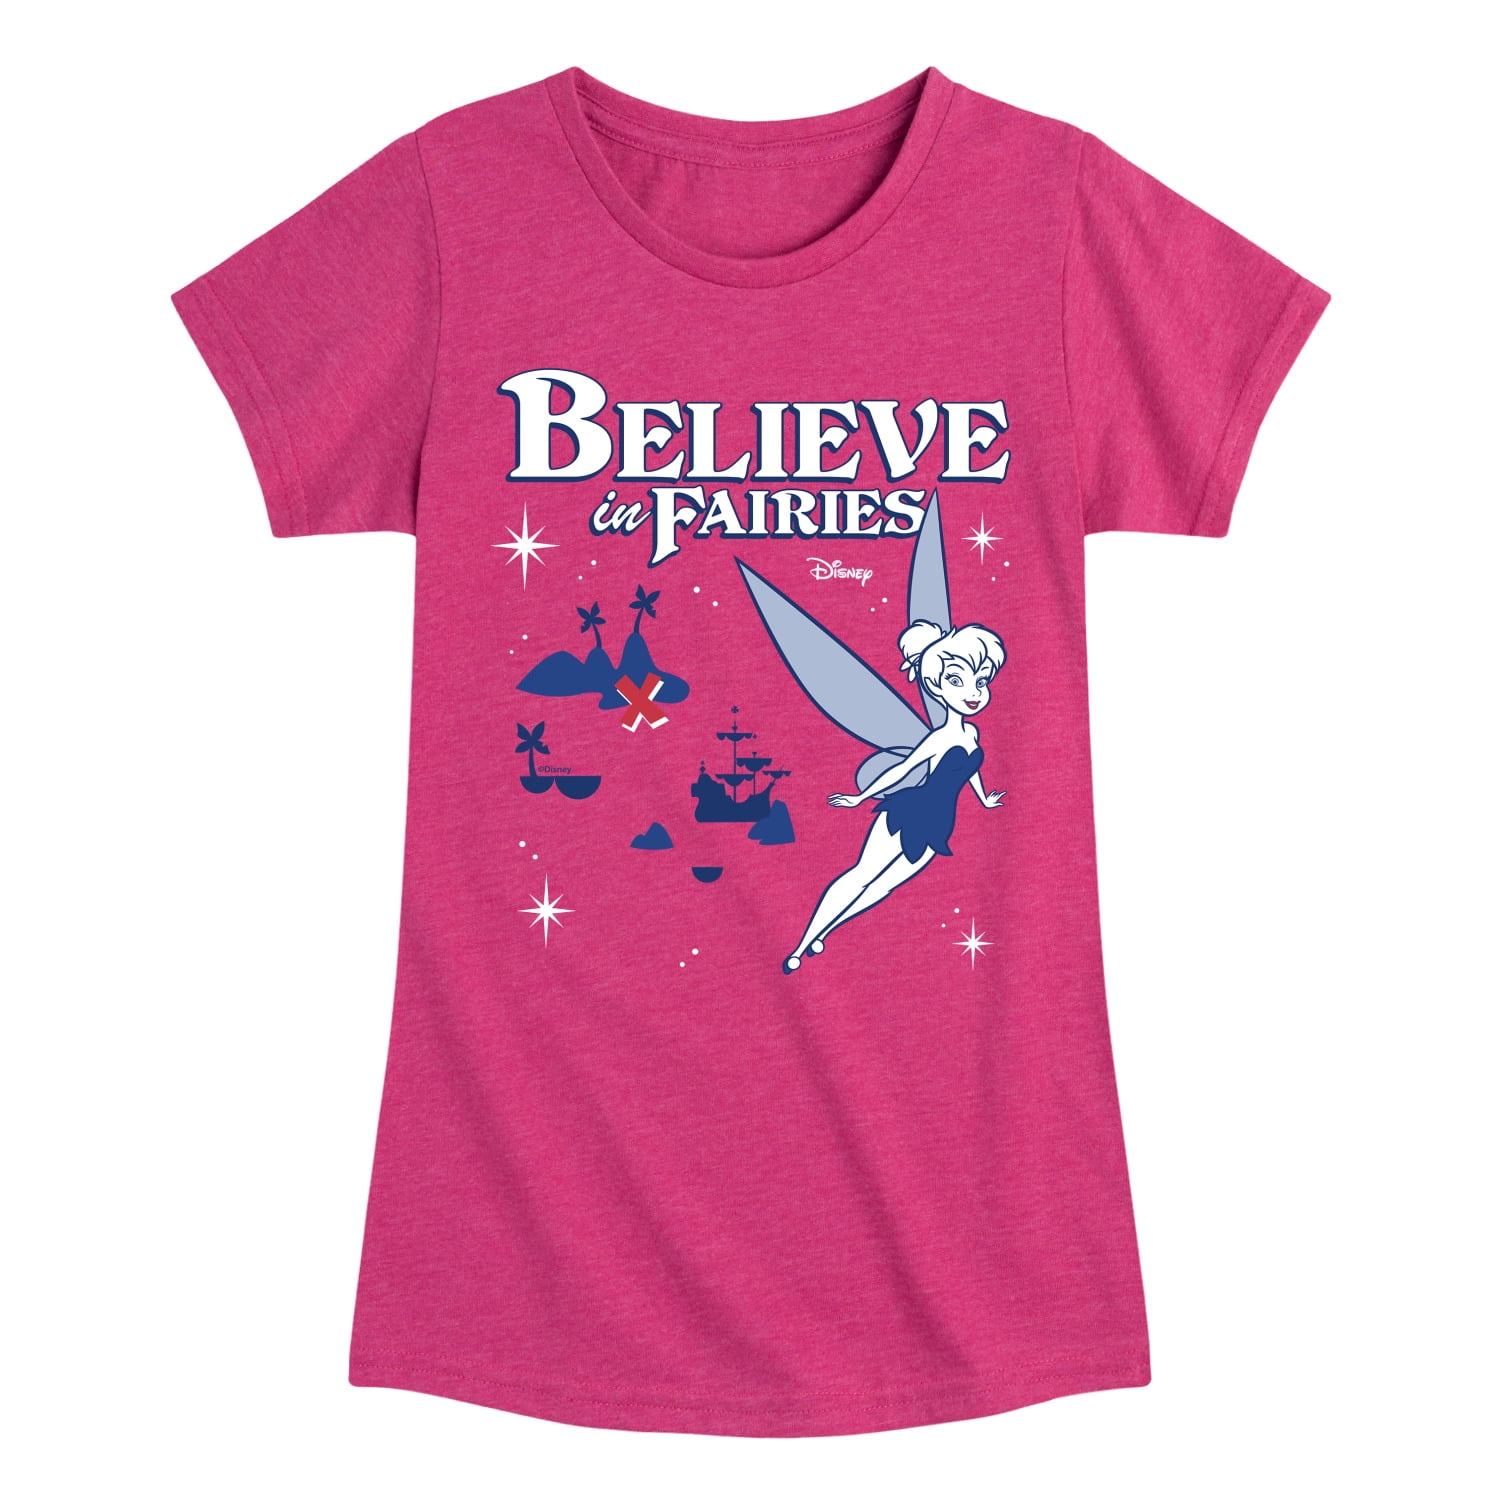 Disney - Peter - - T-Shirt Youth Sleeve Pan Toddler Short - Believe Tinkerbell Fairies Girls in Graphic And